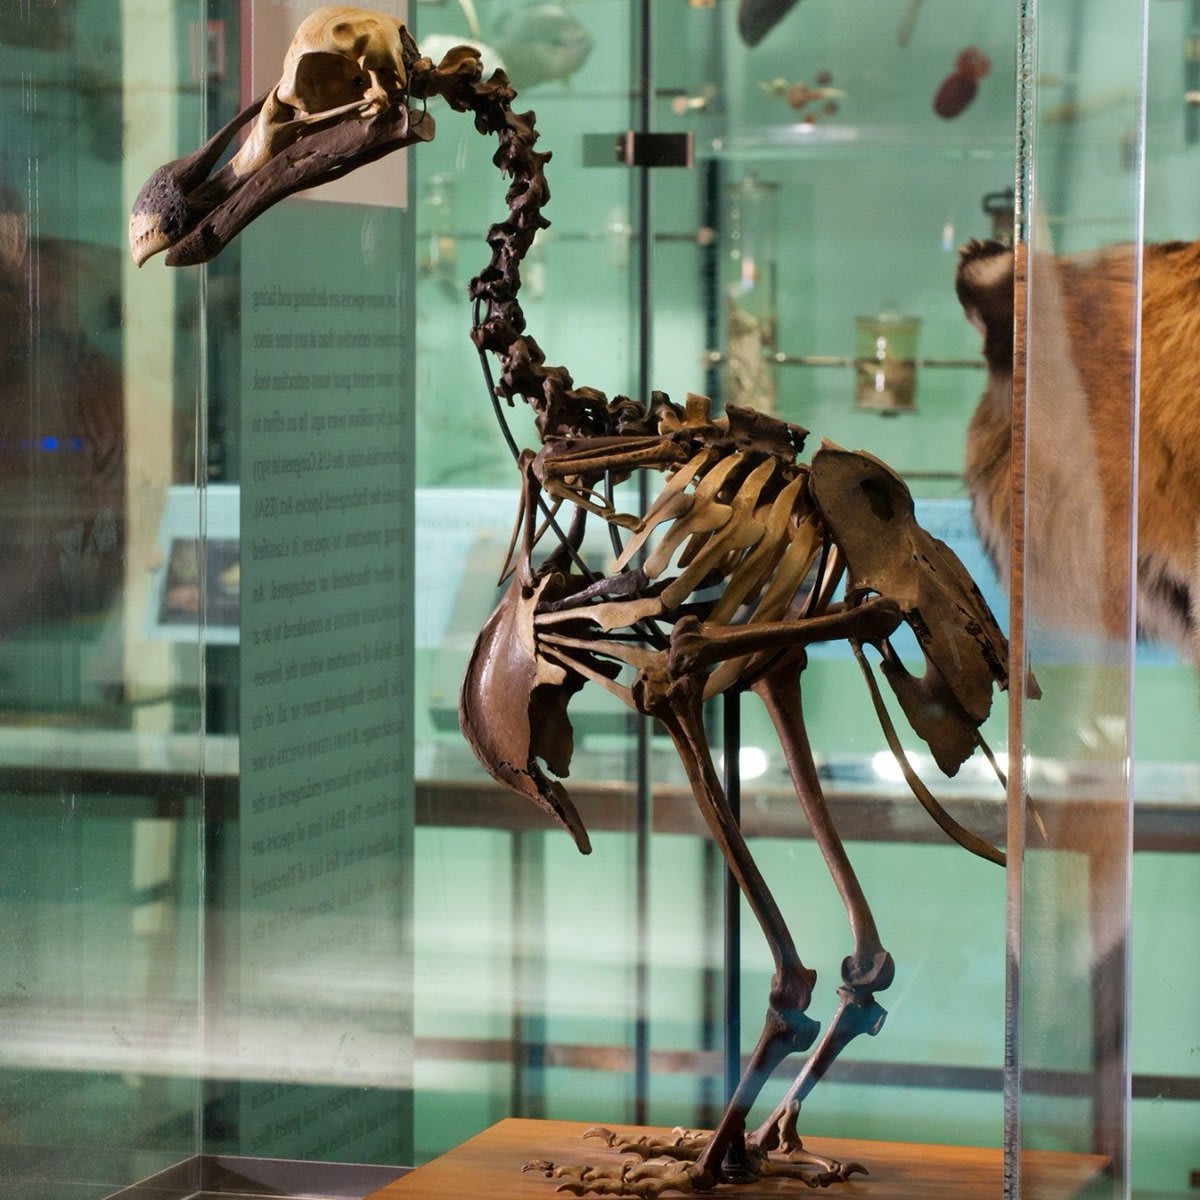 Exhibit of the Day: the Dodo from the Hall of Biodiversity! This bird went extinct in the 1600s, when people and other predators invaded its island home. Mauritius, east of Madagascar, is the only place dodos ever lived. Plan your weekend trip: